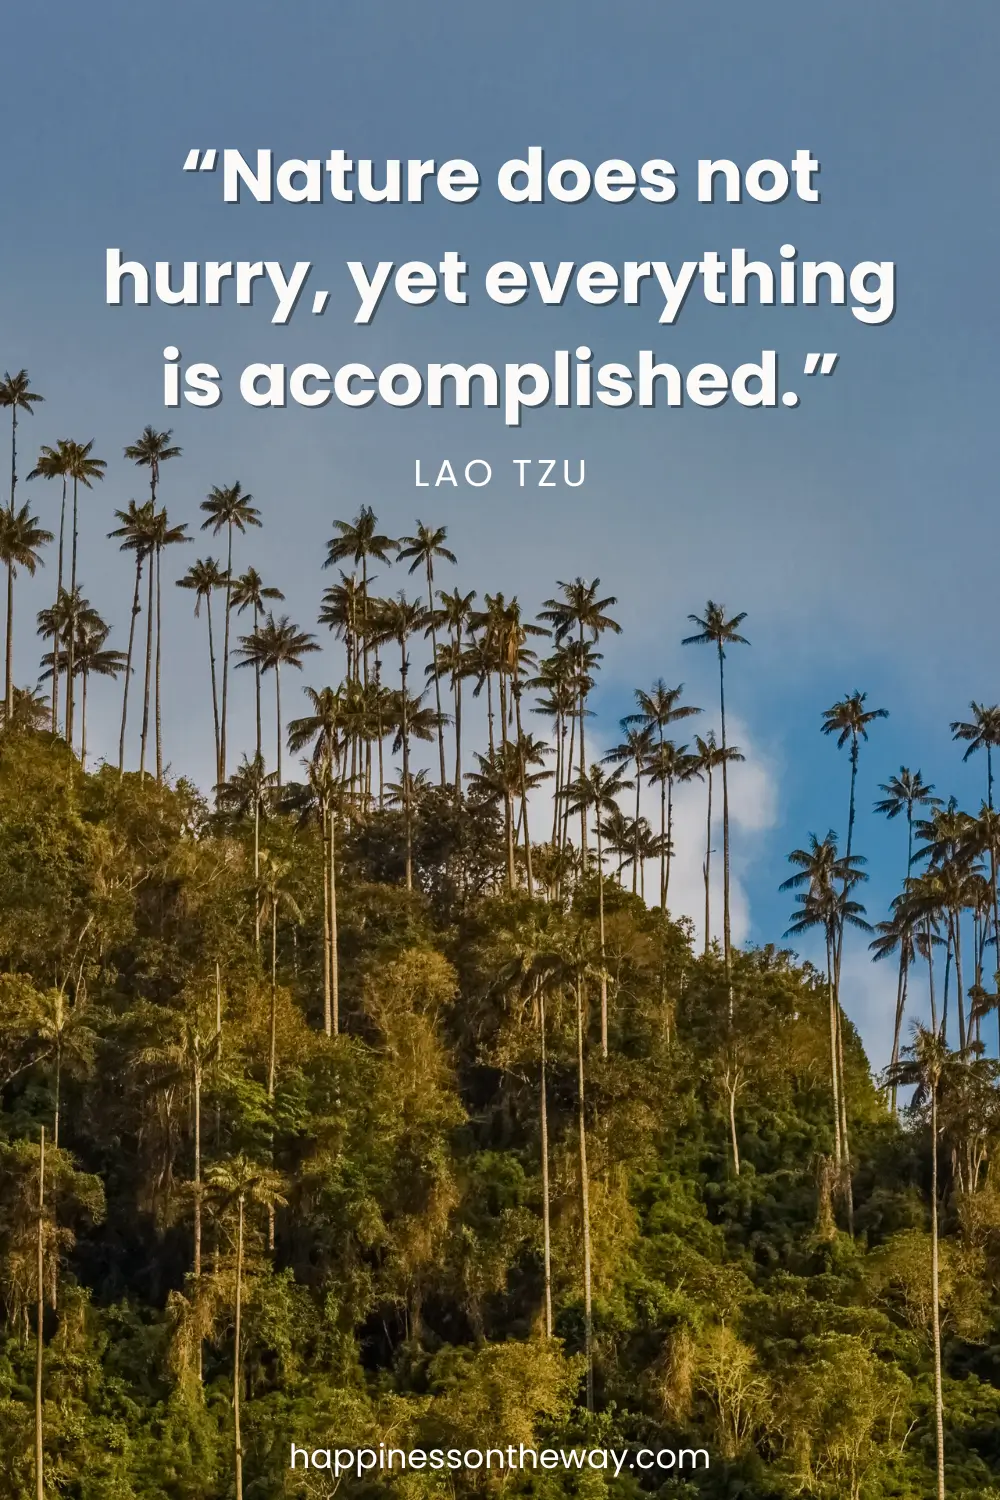 A view of coconut trees on a Valley in Salento, Colombia with a slow travel quote: “Nature does not hurry, yet everything is accomplished.” – Lao Tzu